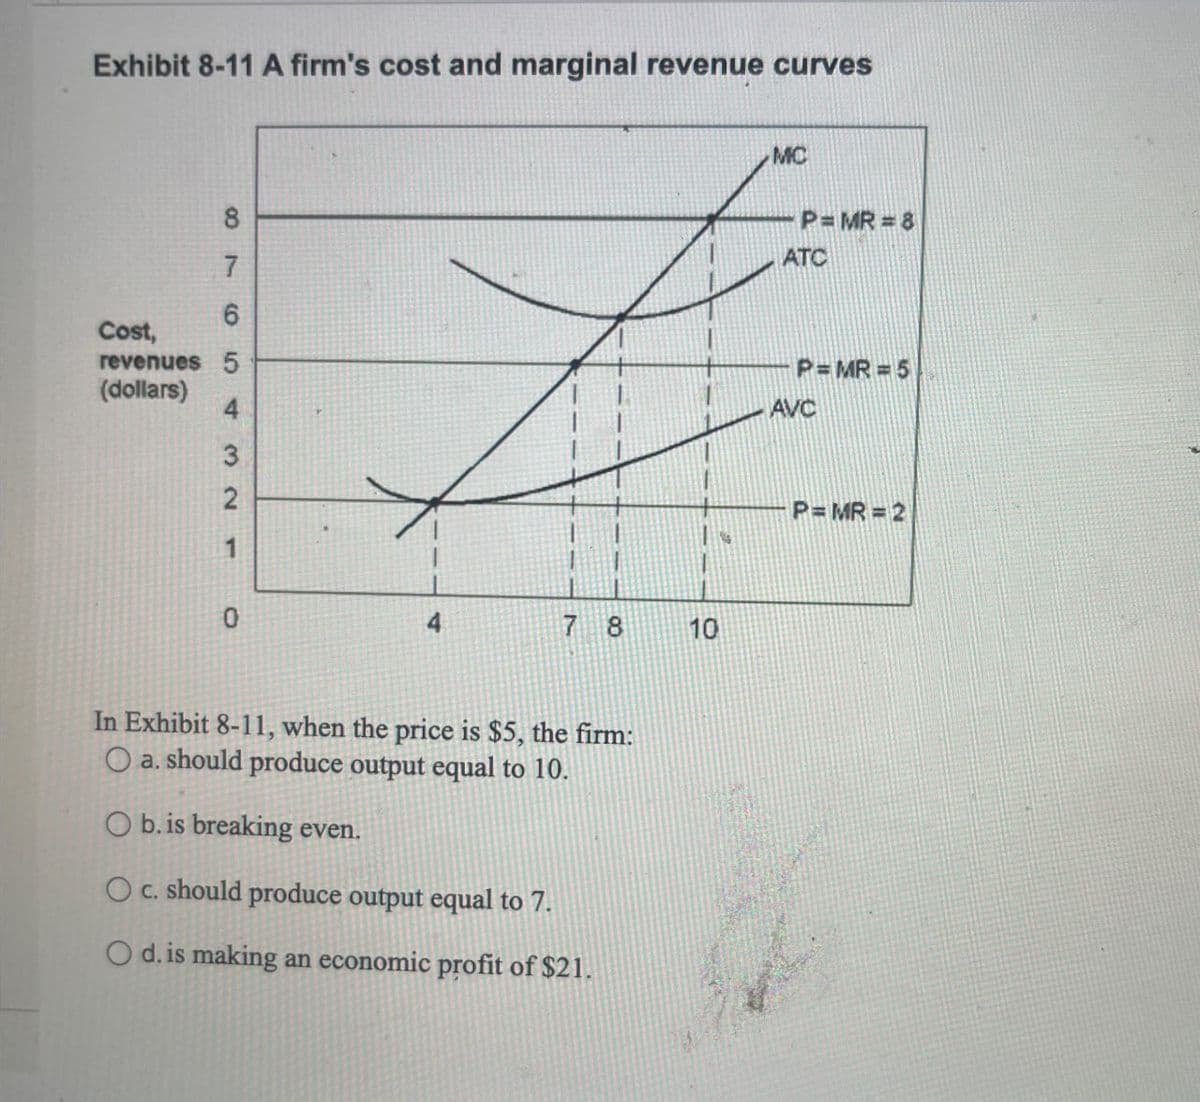 Exhibit 8-11 A firm's cost and marginal revenue curves
B
7
CO
6
Cost,
revenues 5
(dollars)
4
3
2
1
0
78
10
In Exhibit 8-11, when the price is $5, the firm:
O a. should produce output equal to 10.
Ob. is breaking even.
Oc. should produce output equal to 7.
Od. is making an economic profit of $21.
MC
P=MR=8
ATC
P=MR=5
AVC
P=MR=2